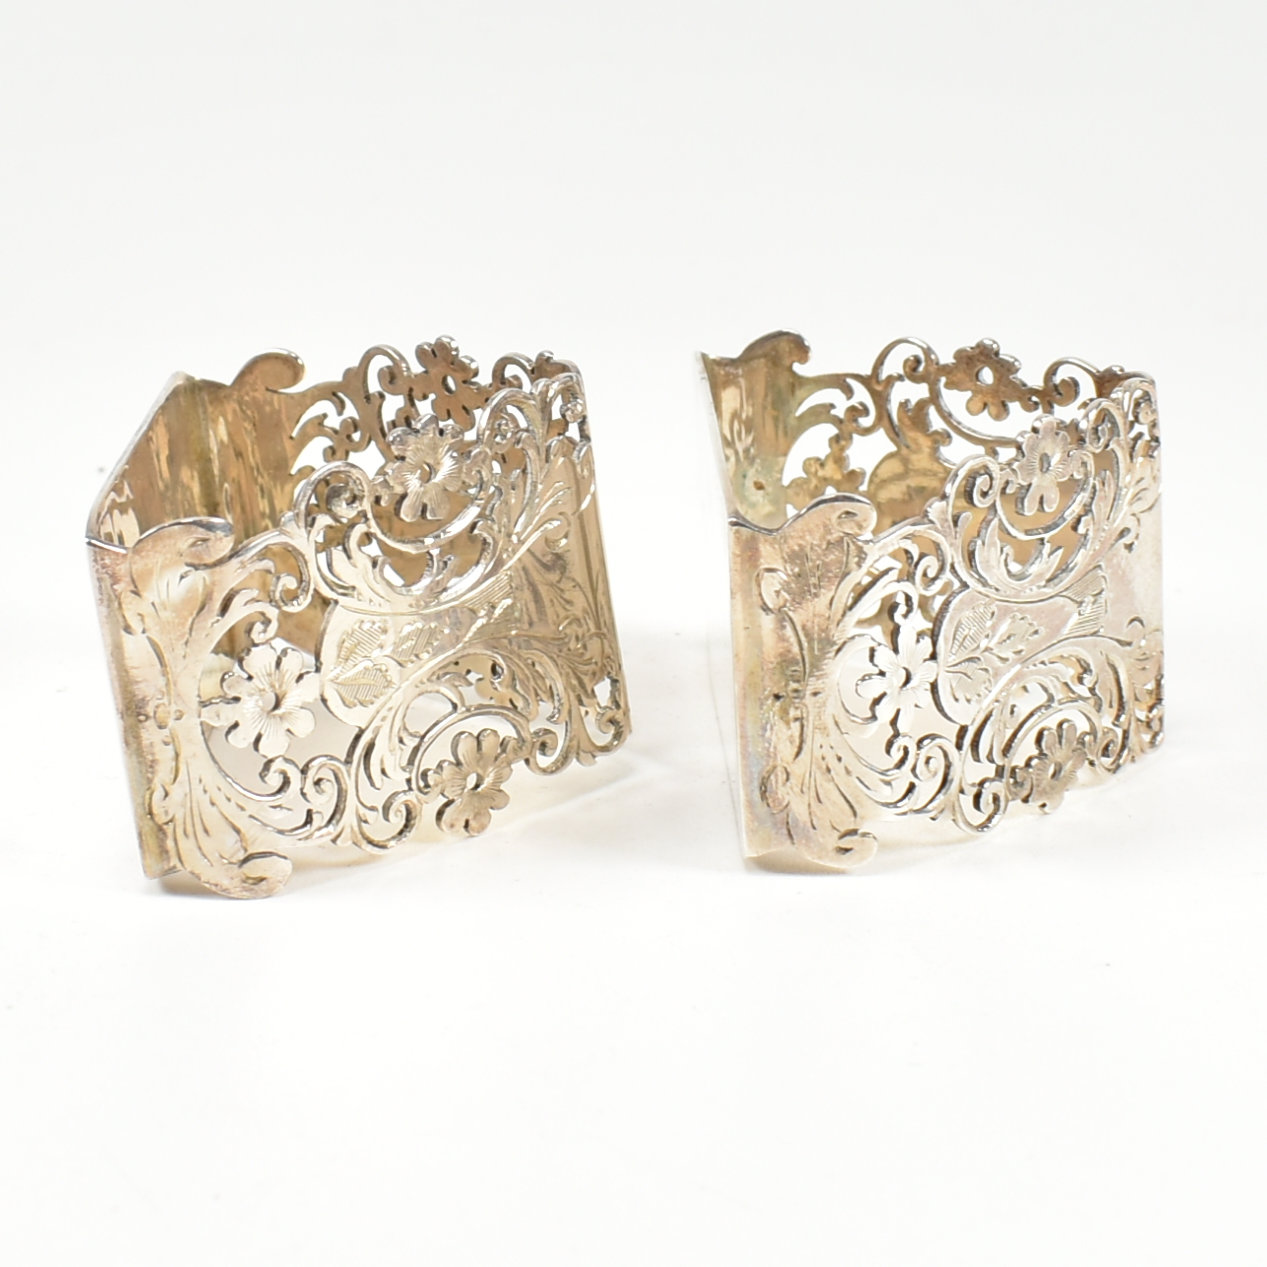 EDWARD VII CASED PAIR OF HALLMARKED SILVER NAPKIN RINGS - Image 7 of 9